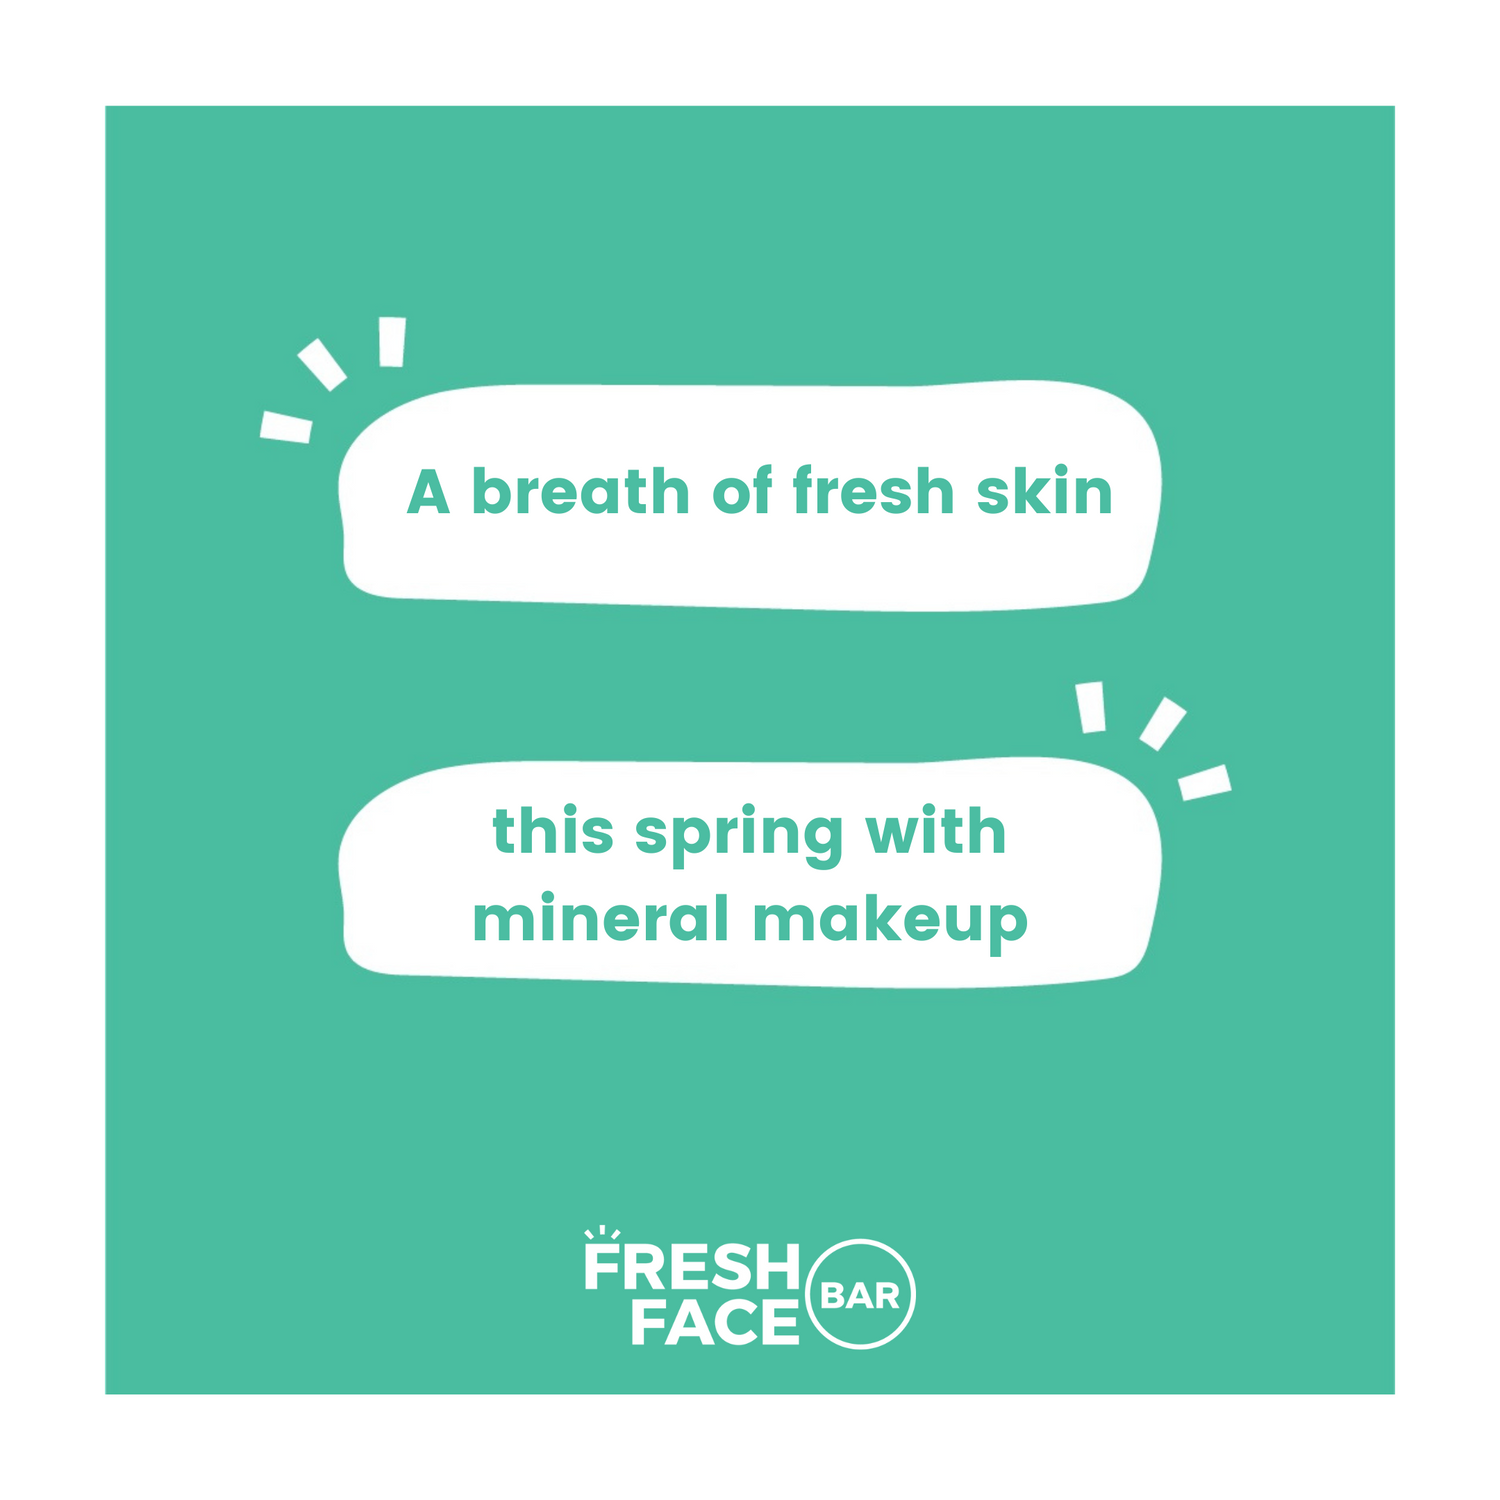 How Mineral Makeup is a breath of fresh skin for the Spring Season!